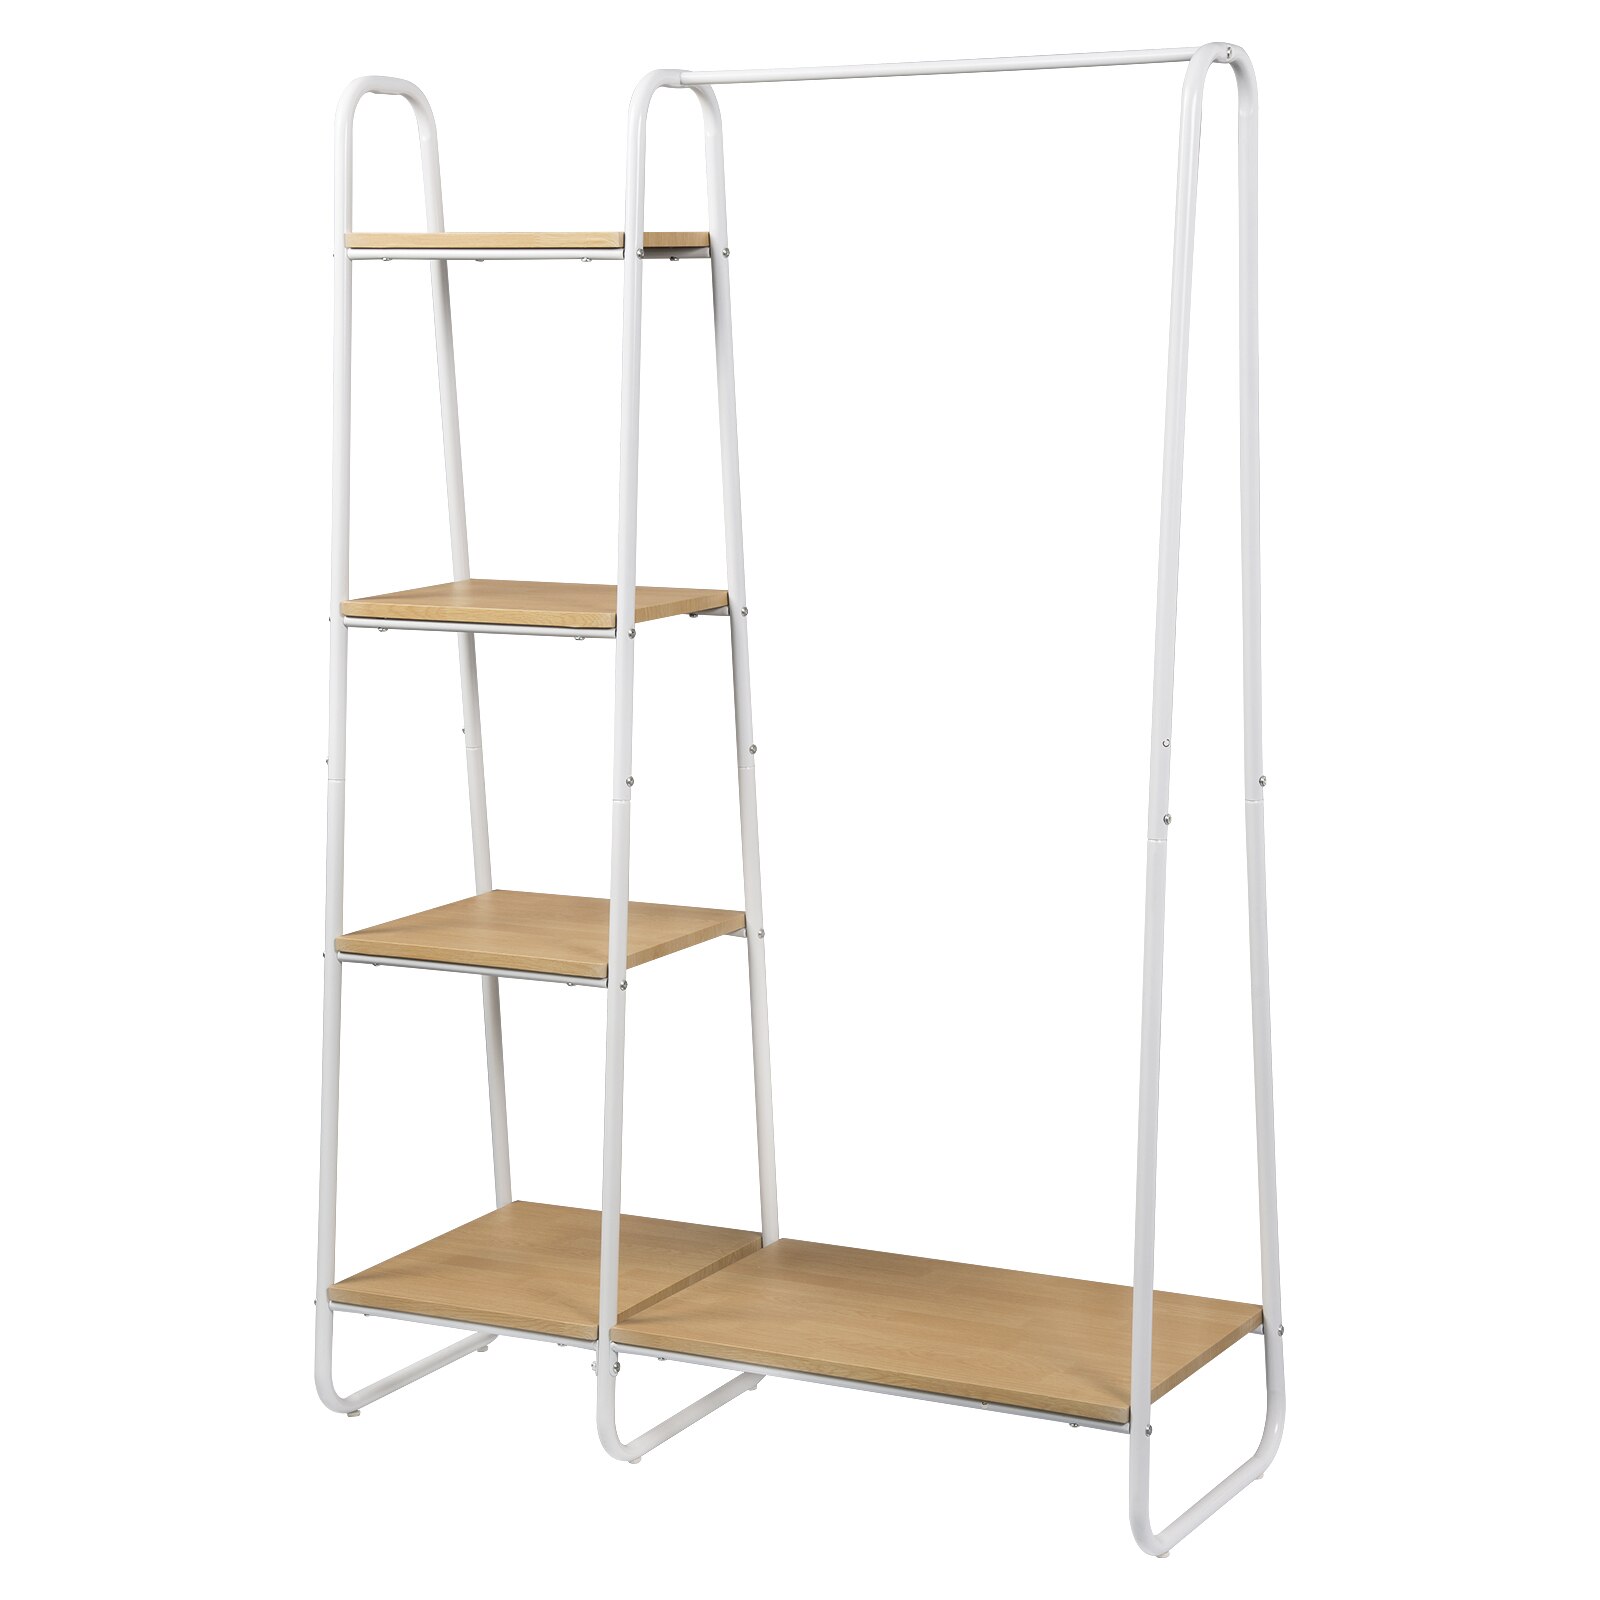 Clothes Rack Stand Hanging Clothes Quilt Shoes Bags Organizer Hanger Stand Coat Rack with 4 Shelves 102x40x150cm Home Furniture